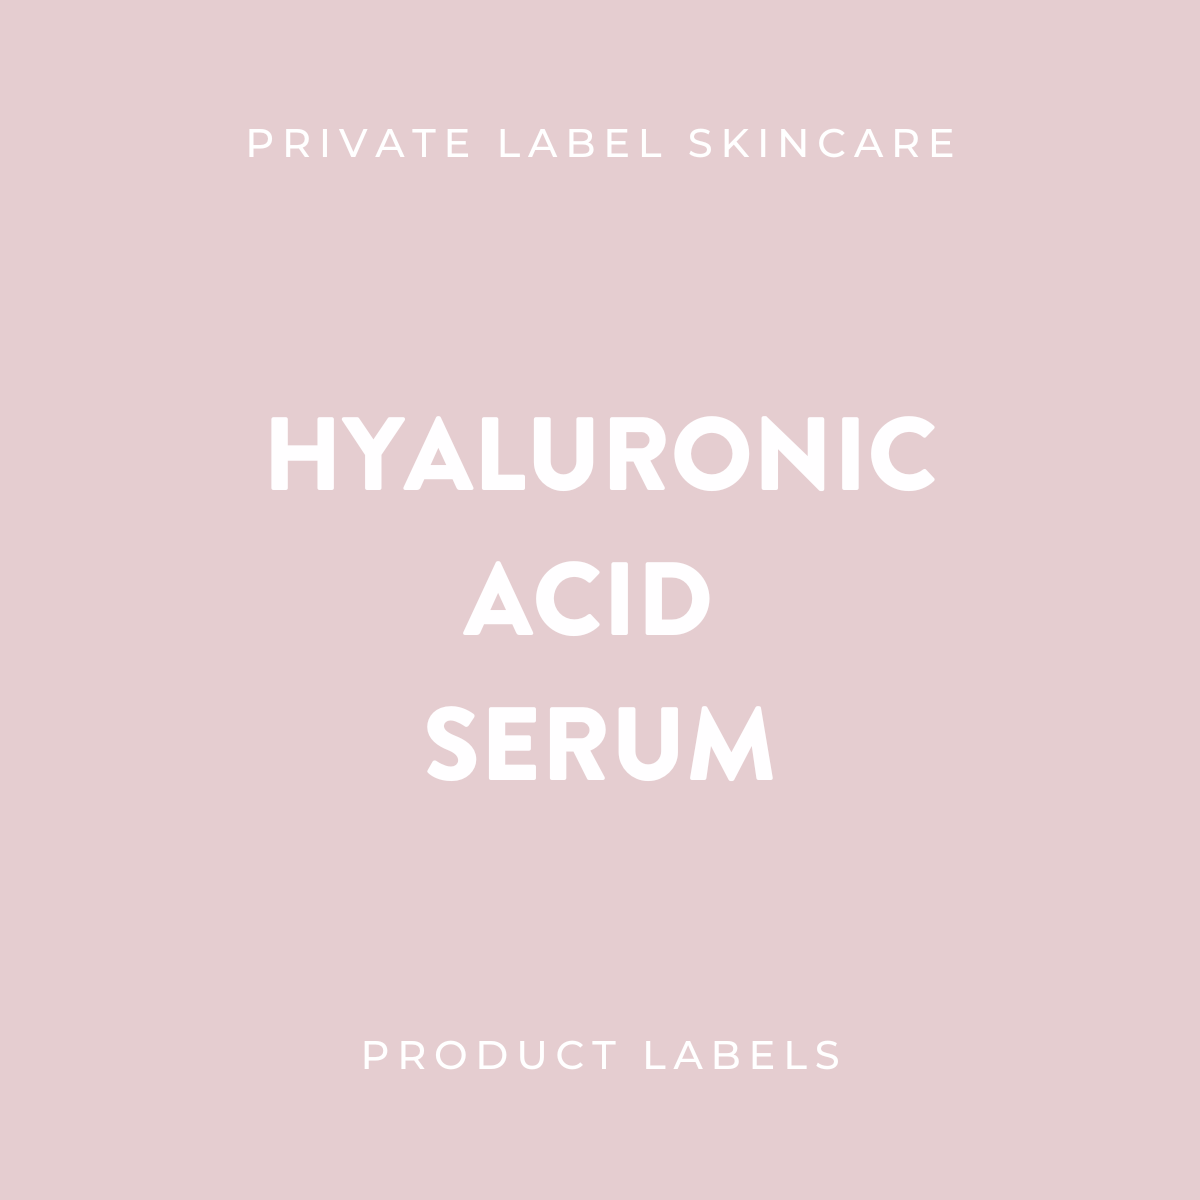 Hyaluronic Acid Serum Product Labels (x 20 labels)